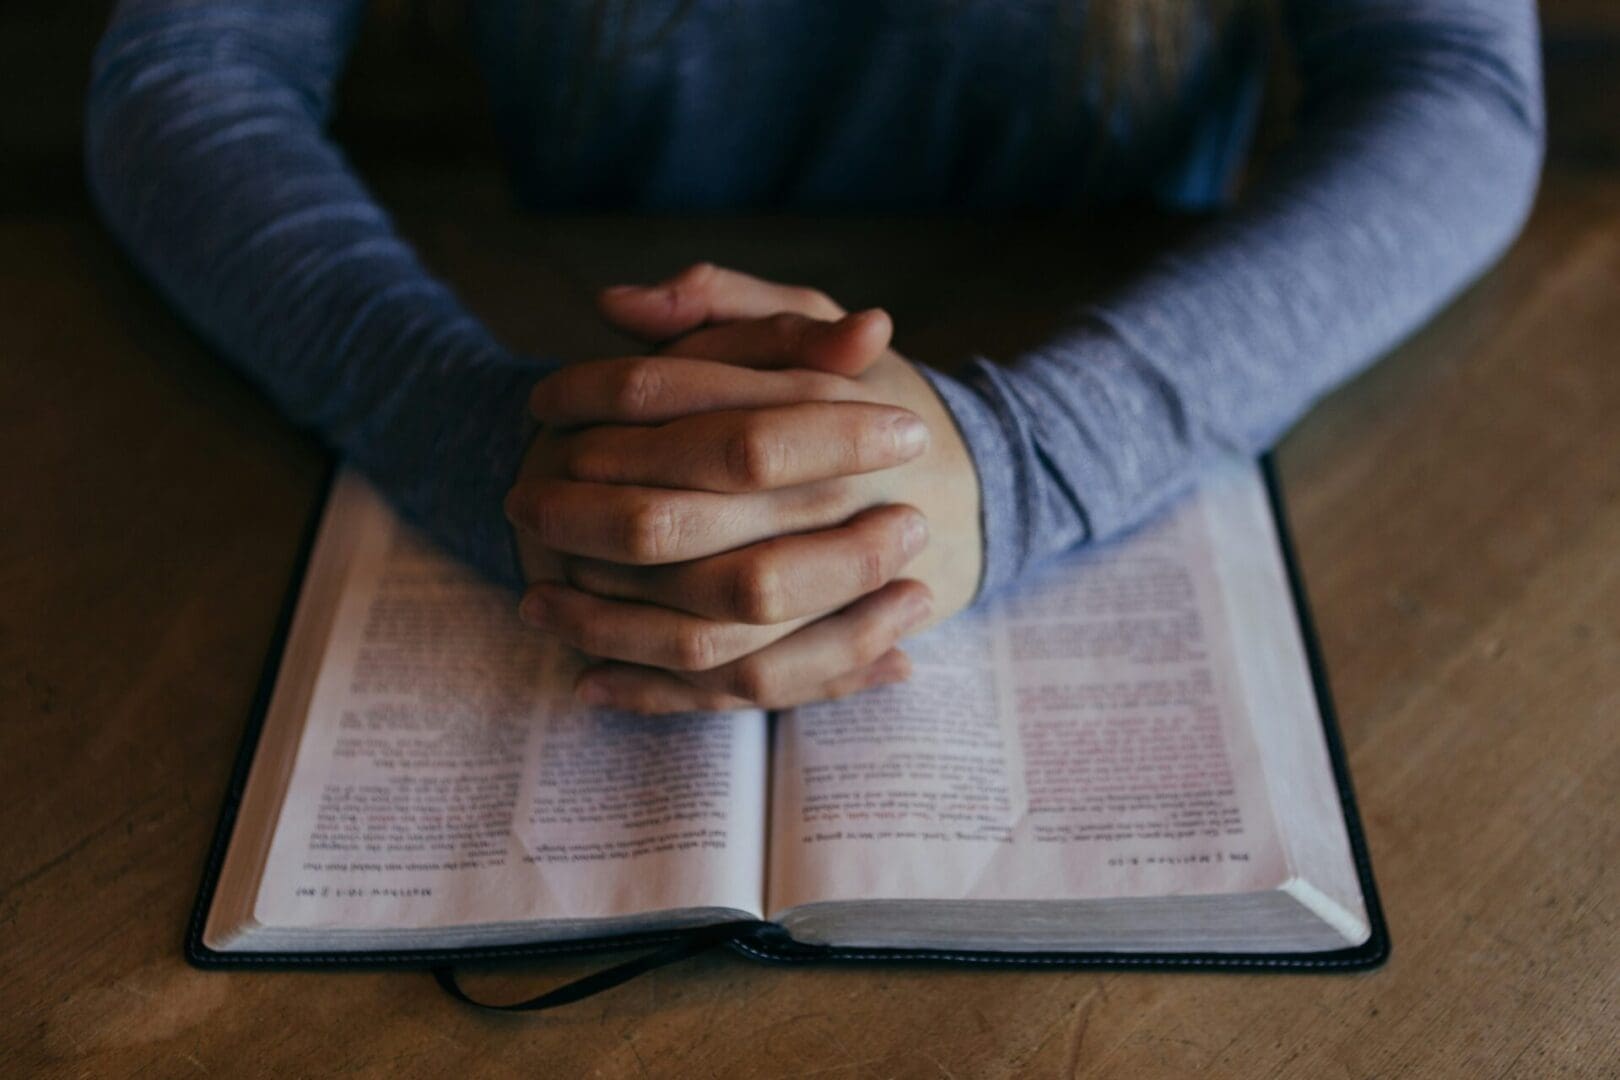 A person is praying on top of an open bible.